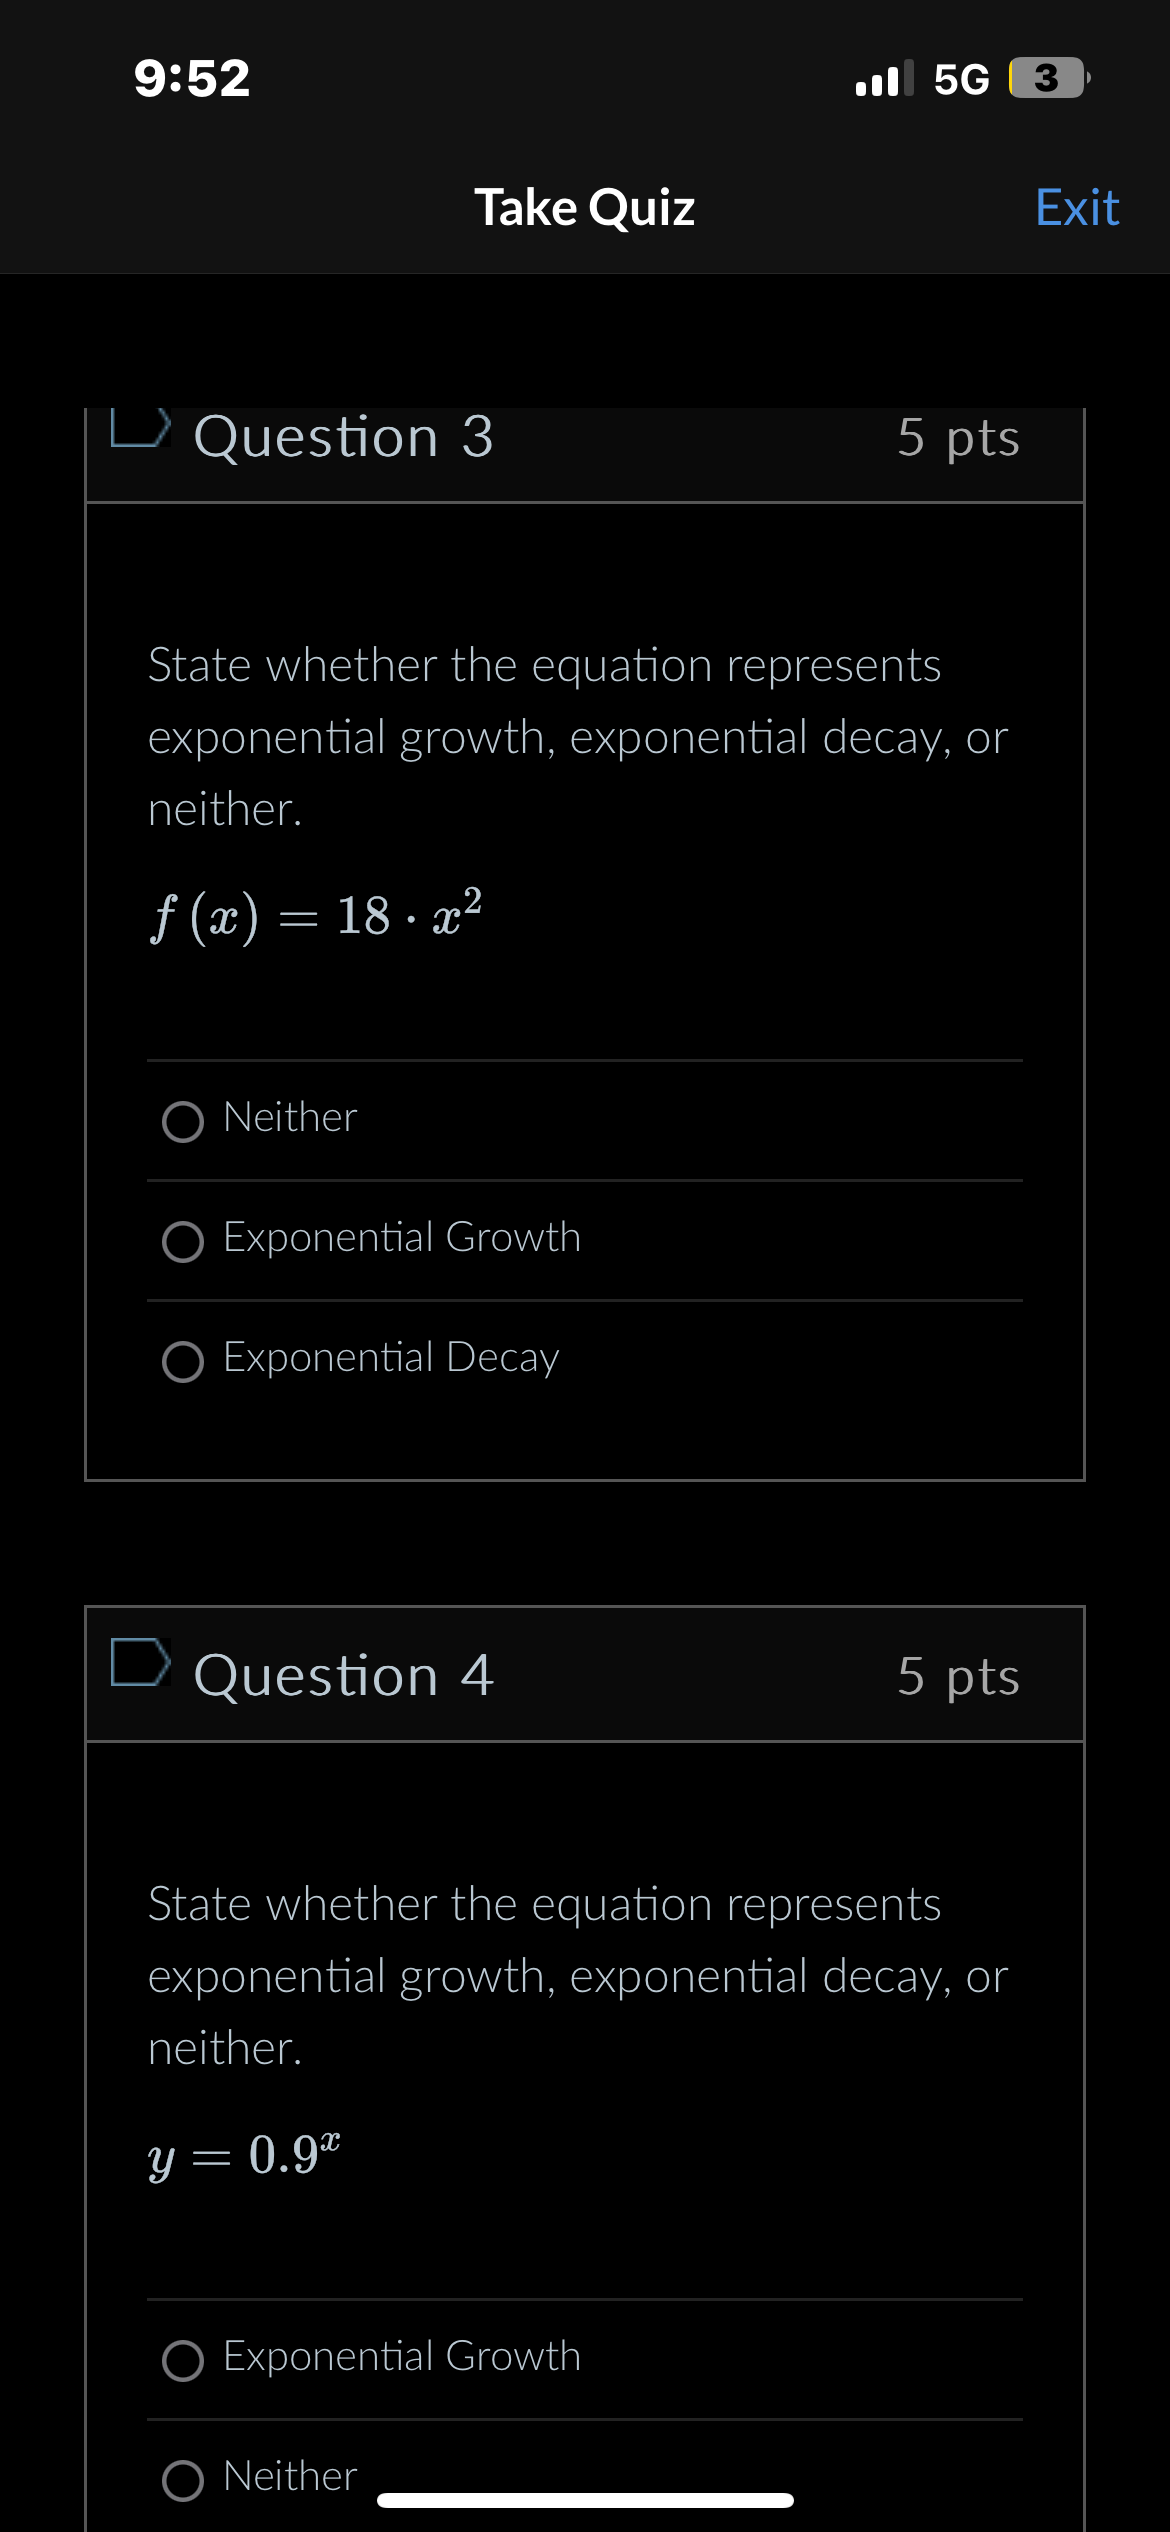 9:52
5G 3
Take Quiz
Exit
L Question 3
5 pts
State whether the equation represents
exponential growth, exponential decay, or
neither.
f(x) = 18. x²
ONeither
O Exponential Growth
O Exponential Decay
Question 4
5 pts
State whether the equation represents
exponential growth, exponential decay, or
neither.
y = 0.92
O Exponential Growth
ONeither